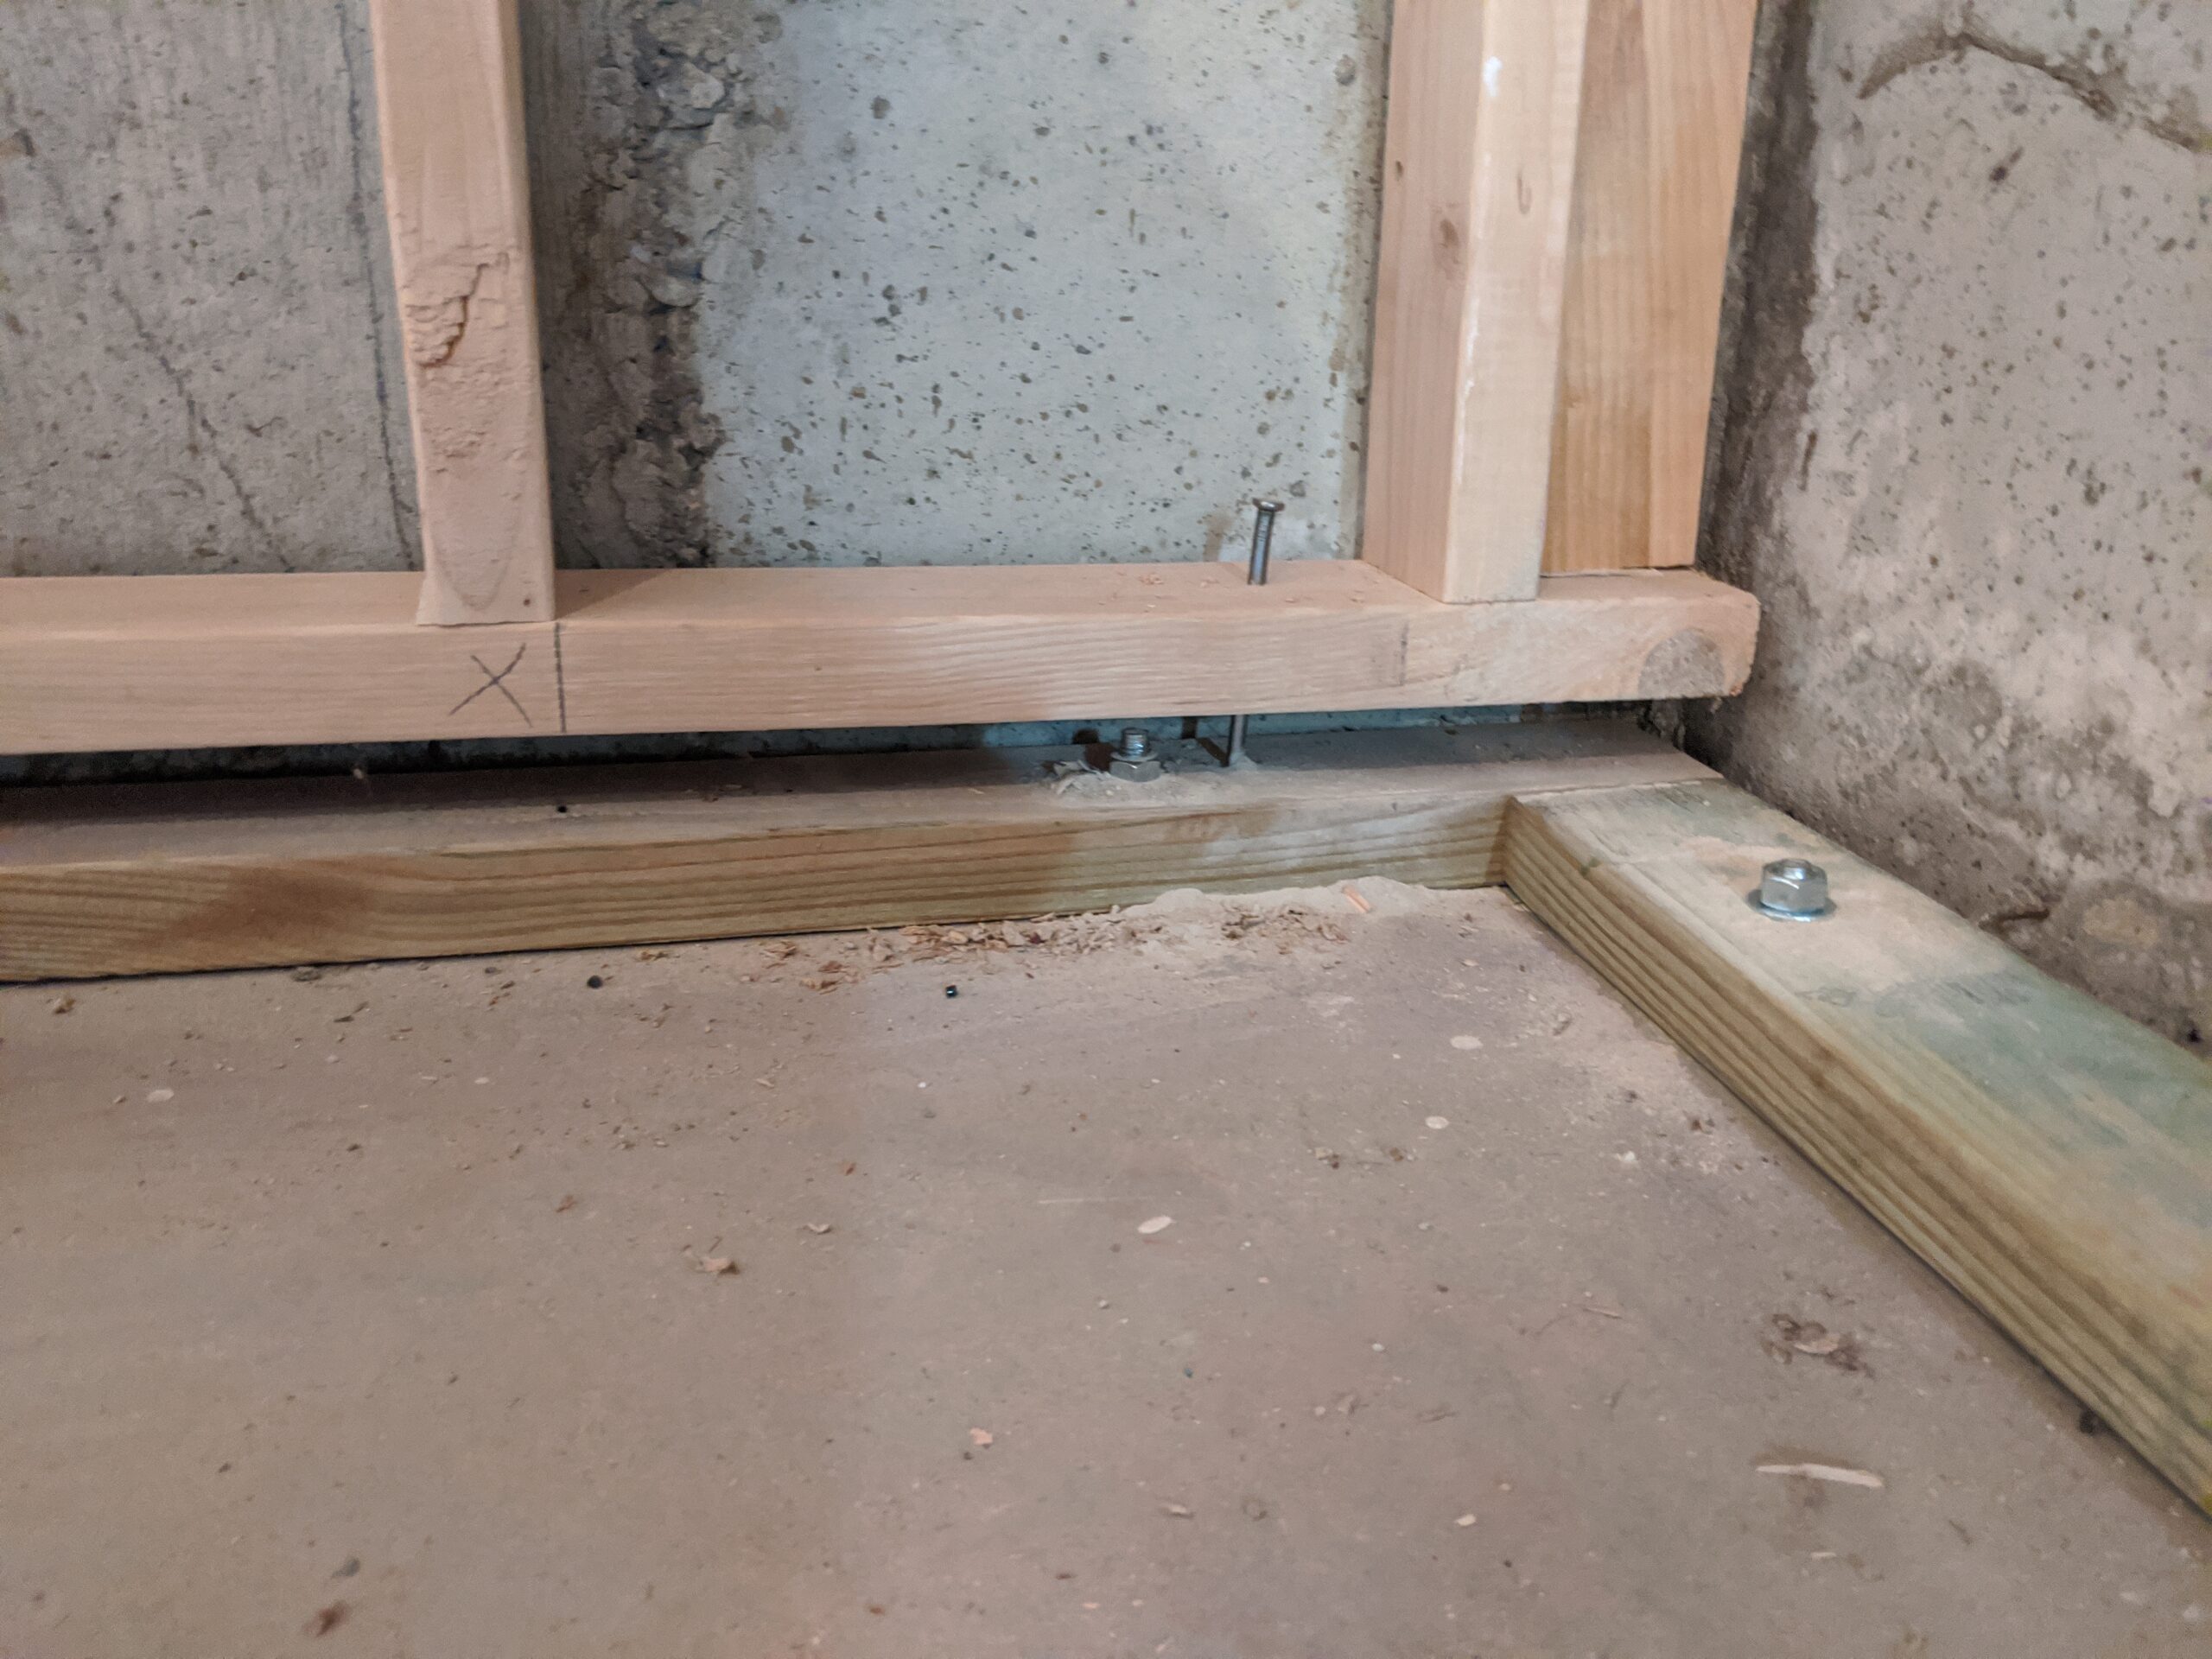 IN PROGRESS Here’s a close-up of a floating wall that’s framed correctly. Notice the gap below the wall and bolt through the bottom of the wall into the floor plate. The green tint of the floor plate indicates that it’s pressure-treated lumber that won’t rot when in direct contact with the concrete subfloor.